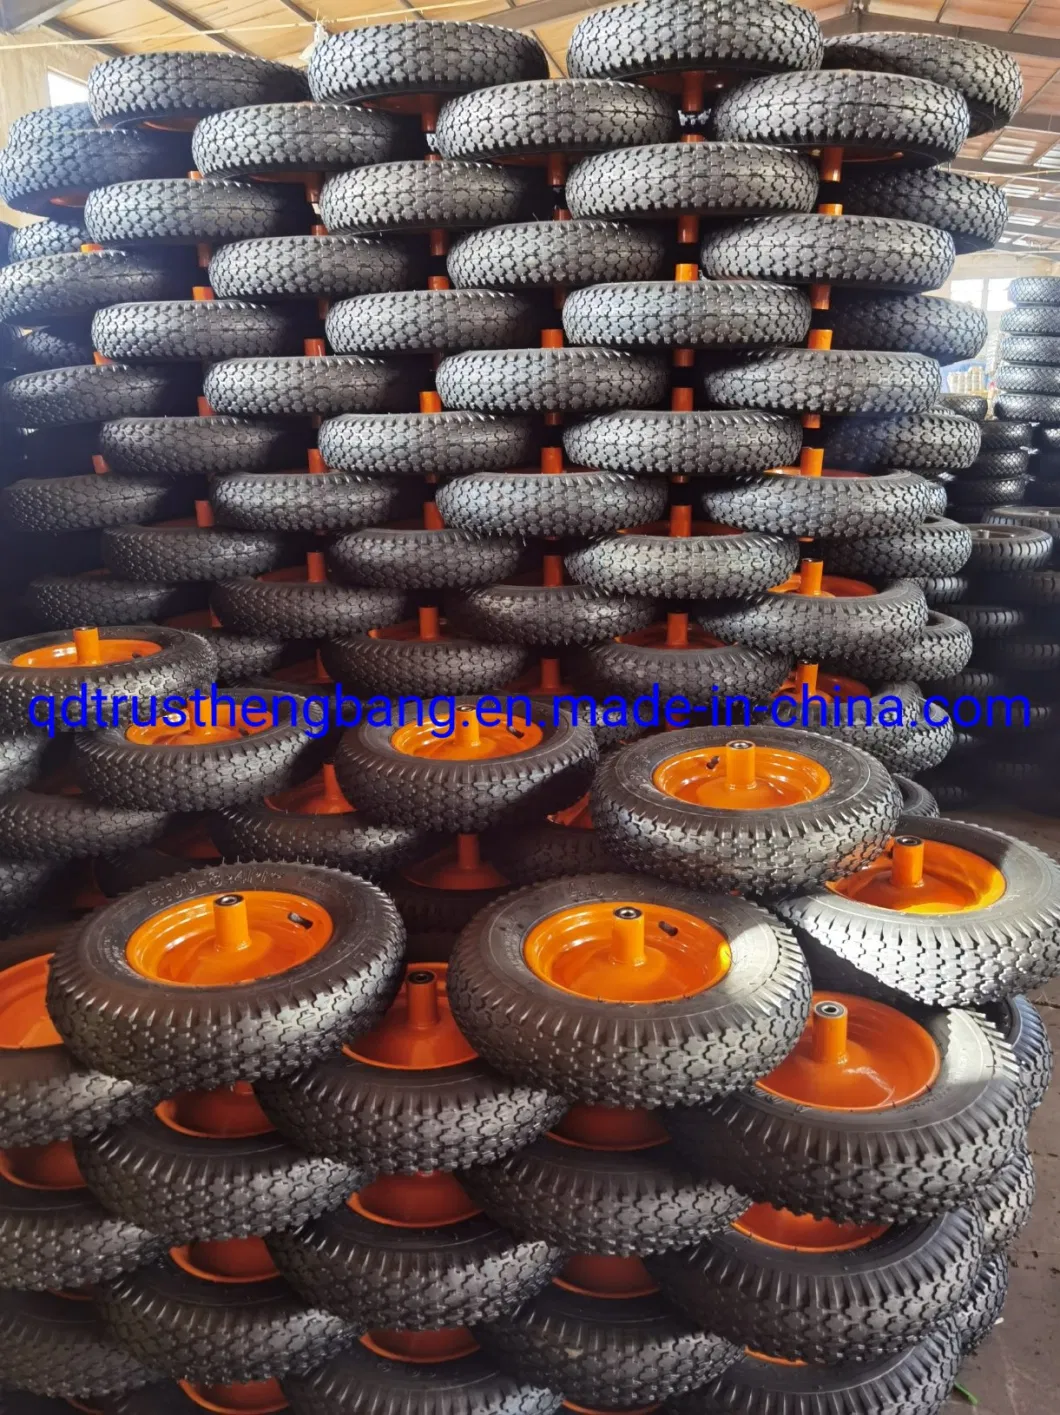 Tyres Tires for Rubber Wheel Pneumatic Wheel with Plastic Rim for Wheelbarrows, Hand Trolleys, Tool Carts